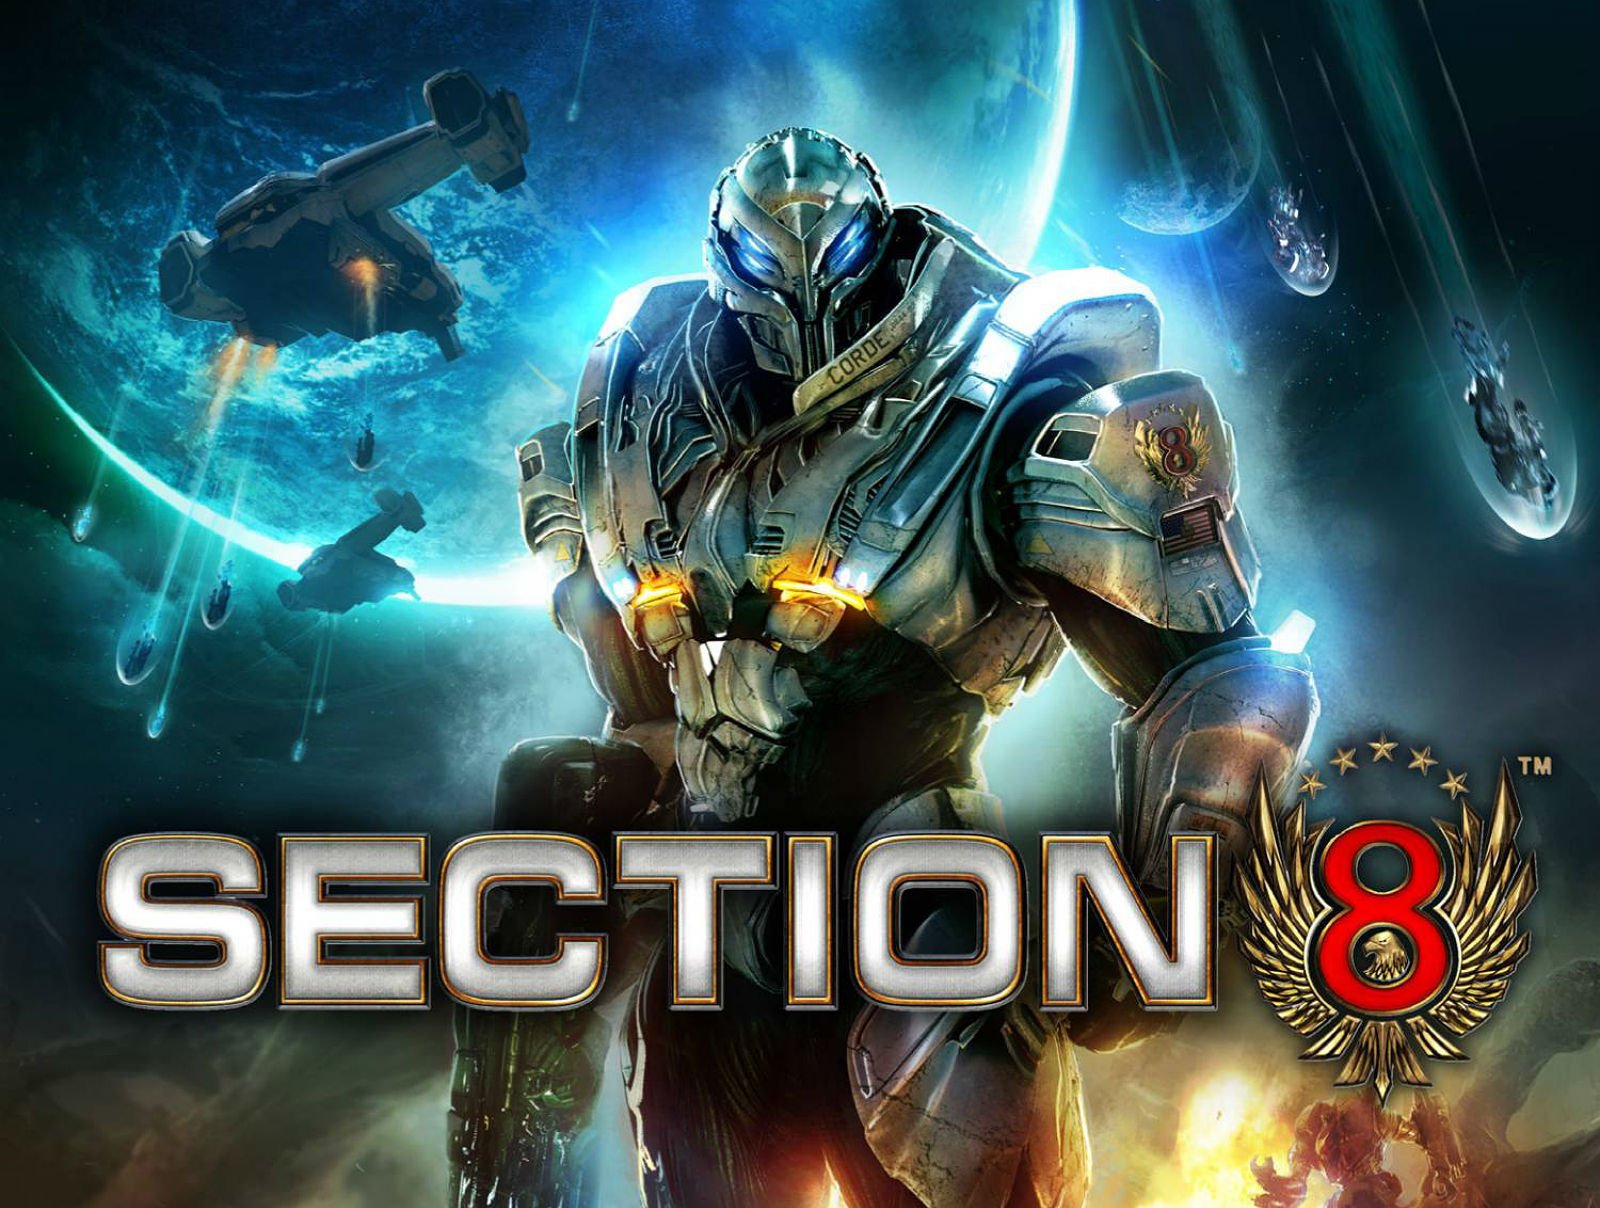 section, 8, Action, Fighting, Futuristic, Sci fi, Warrior, Shooter, 1sect8, Fps, Armor, Suit, Poster Wallpaper